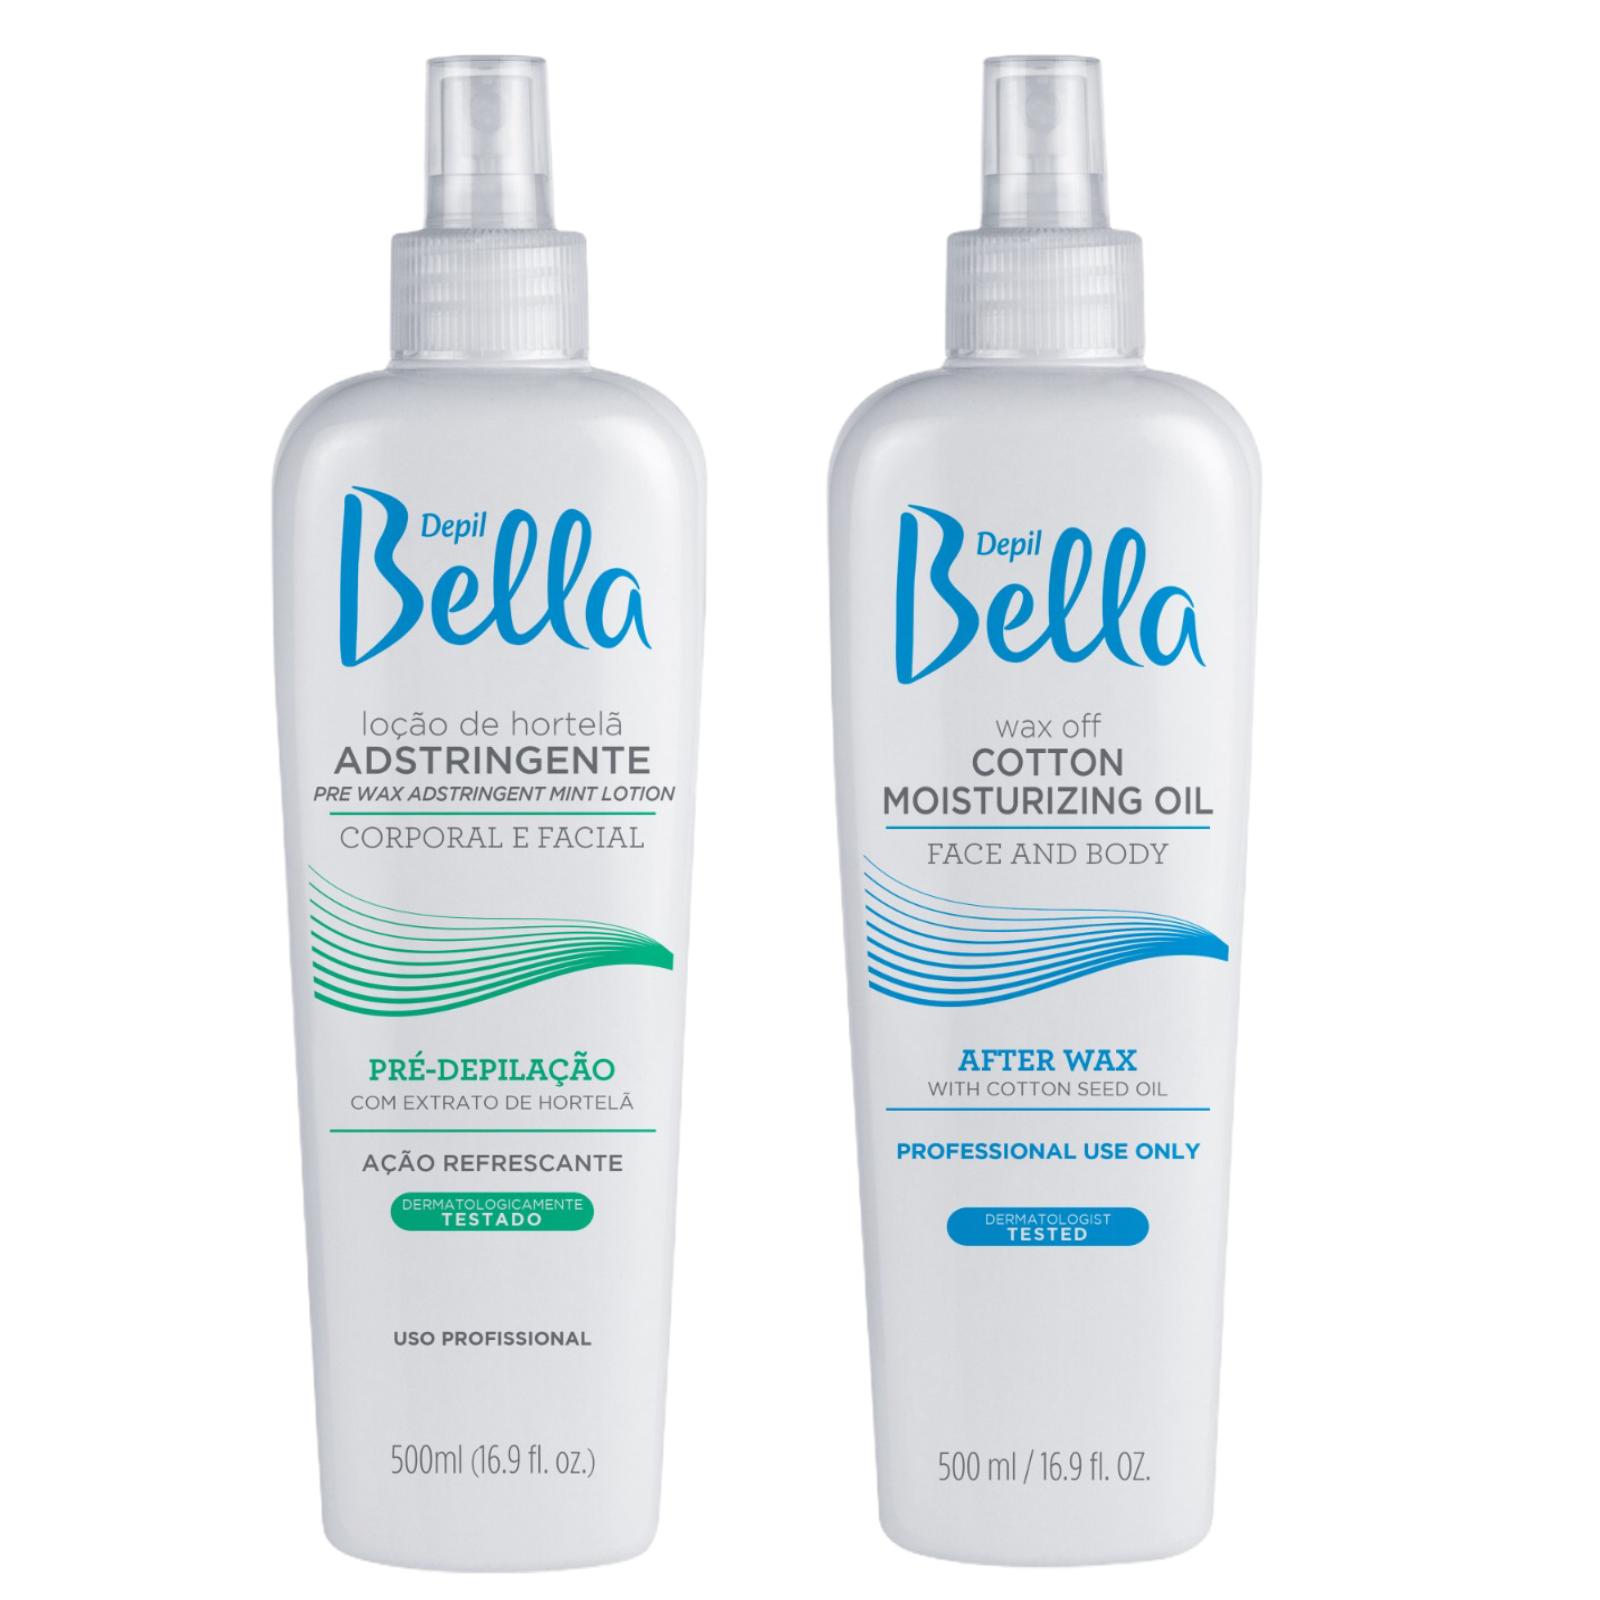 Depil Bella Skin Care Kit Kit Depil Bella, 1 unit Post Waxing Oil Remover and 1 unit Pre Waxing Astringent.